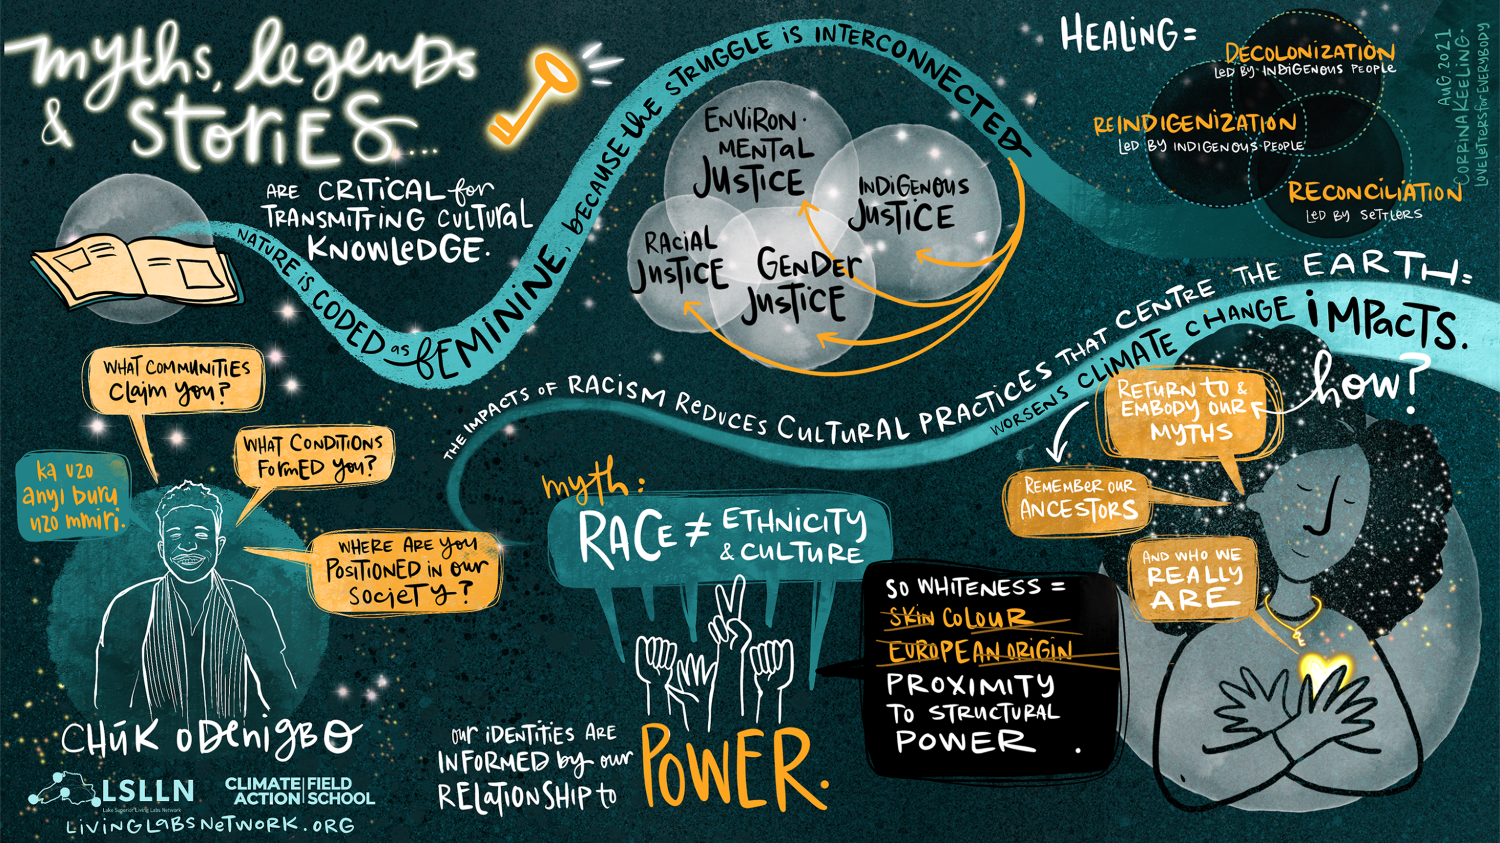 Graphic drawn during Chuk Odenigbo's Keynote Presentation about myths, legends, and stories are critical for transmitting cultural knowledge.